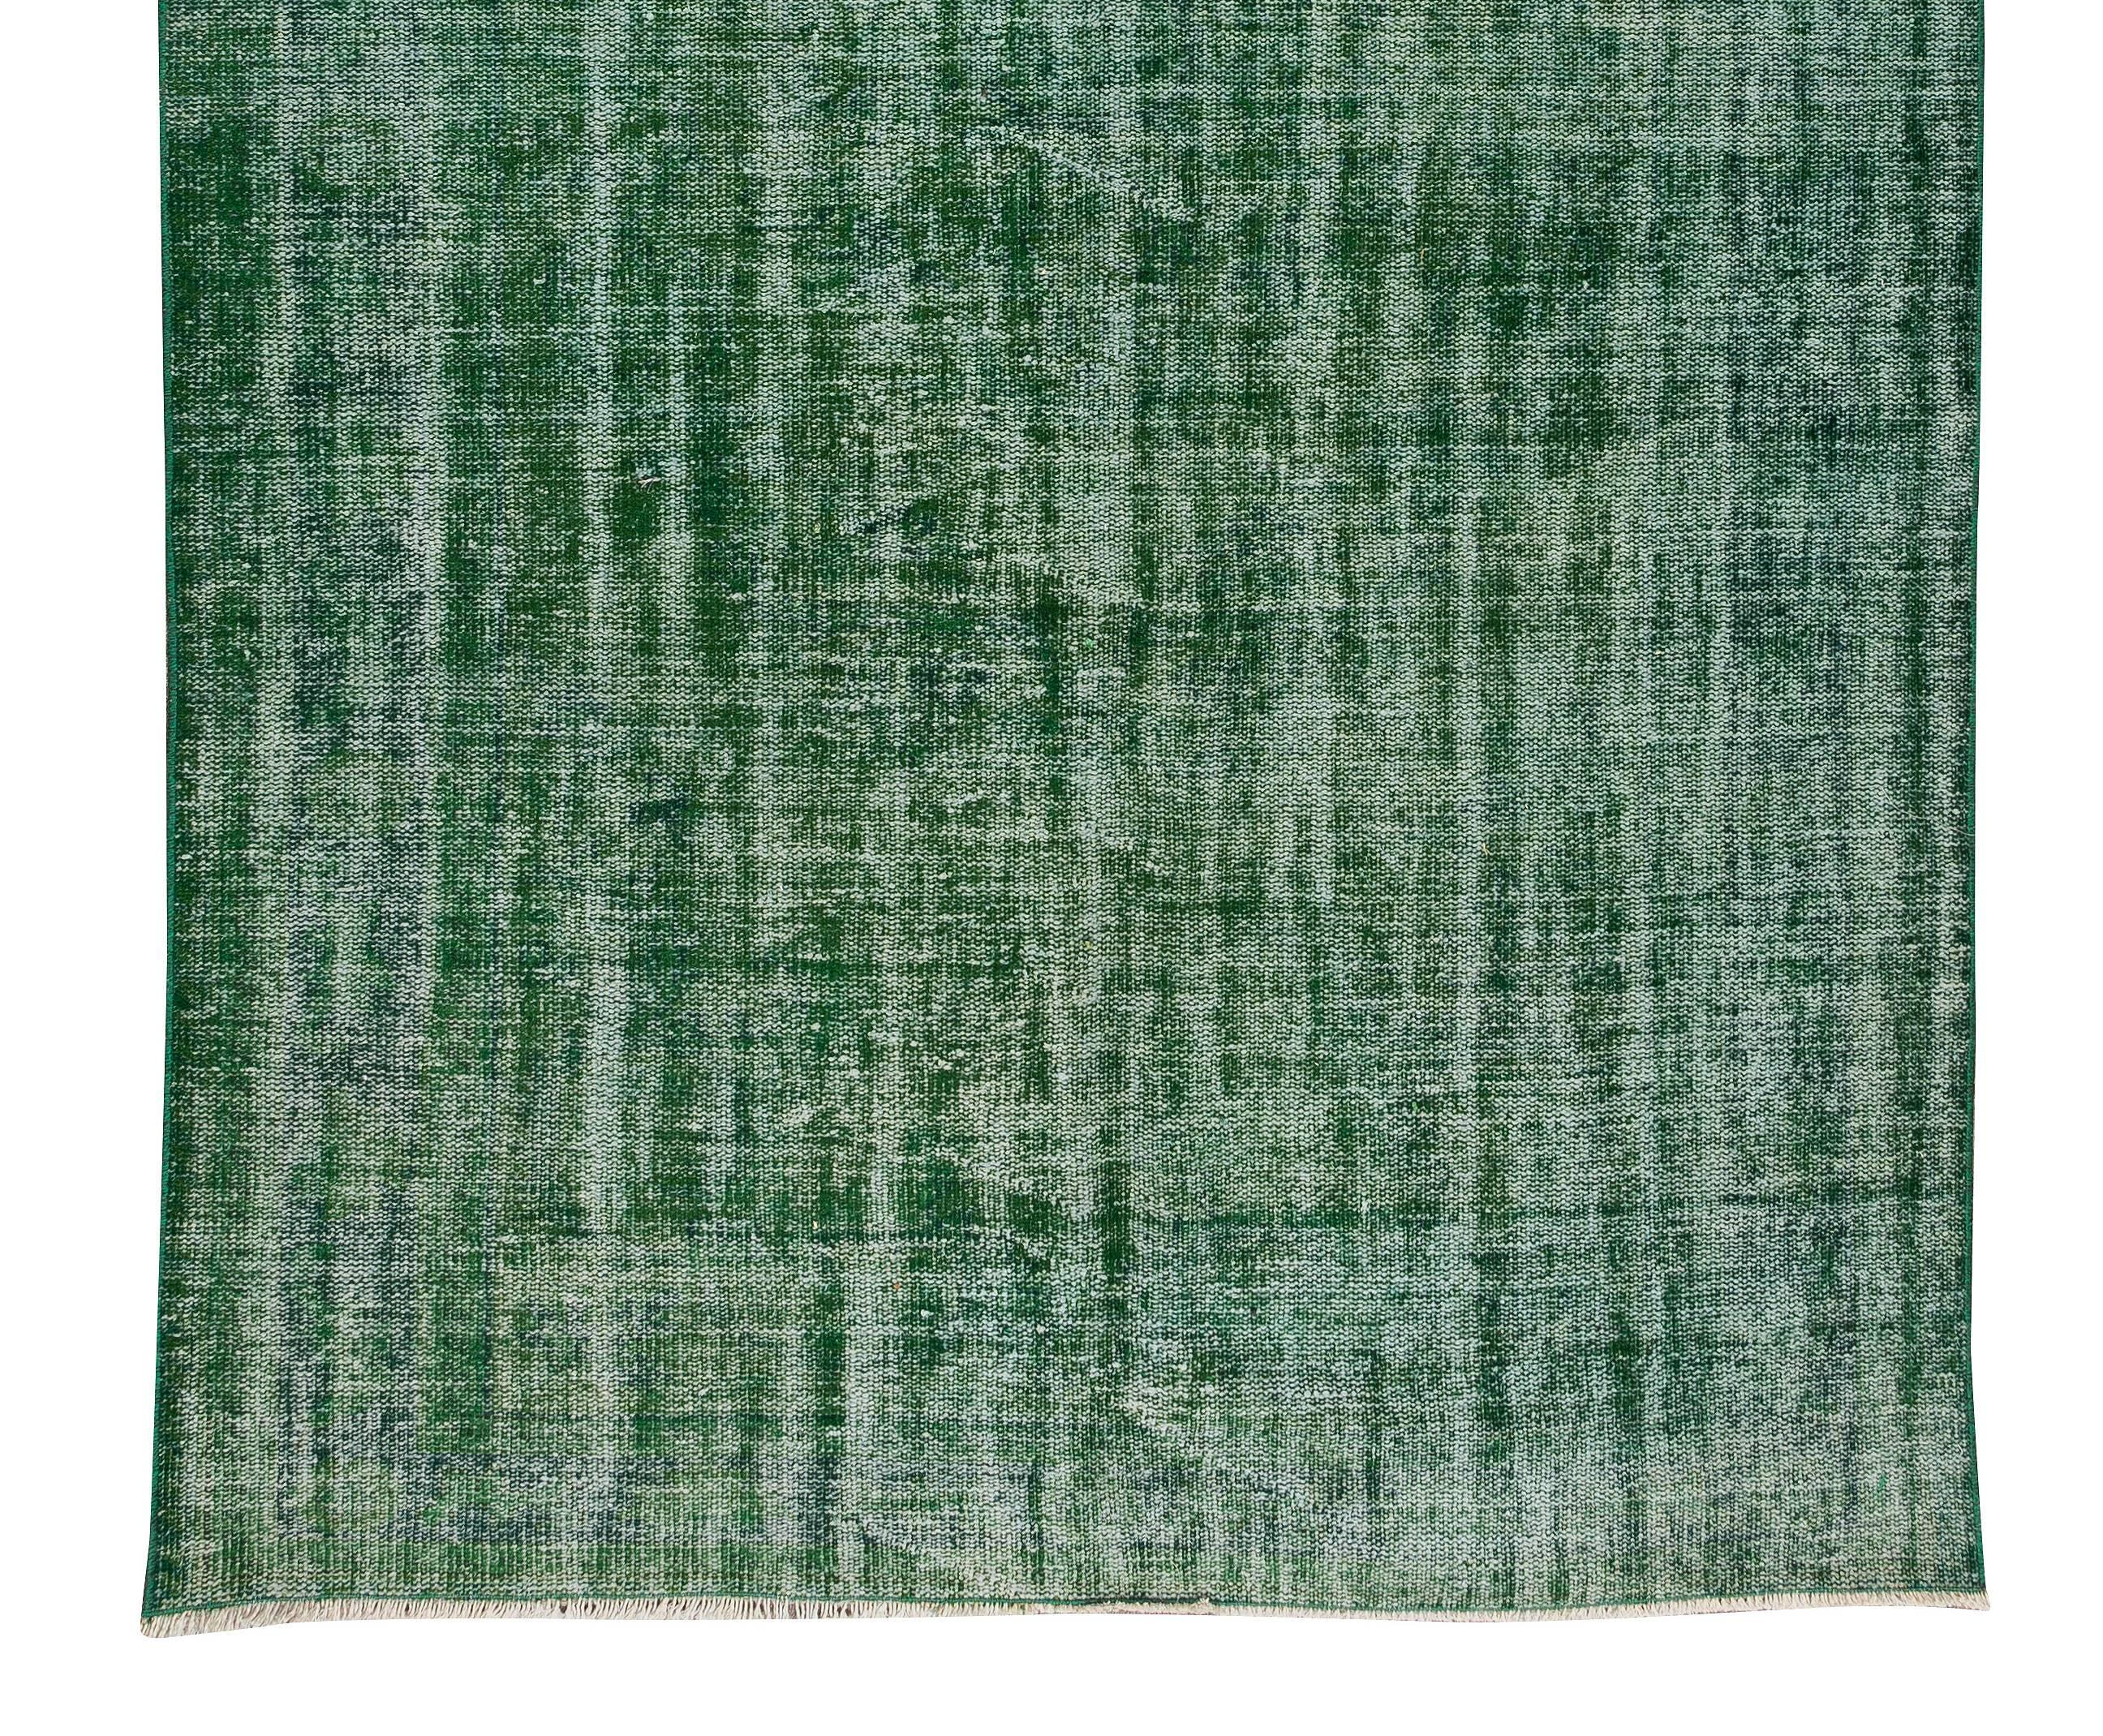 5.7x9.8 Ft Handmade Vintage Turkish Rug, Plain Green Contemporary Wool Carpet In Good Condition For Sale In Philadelphia, PA